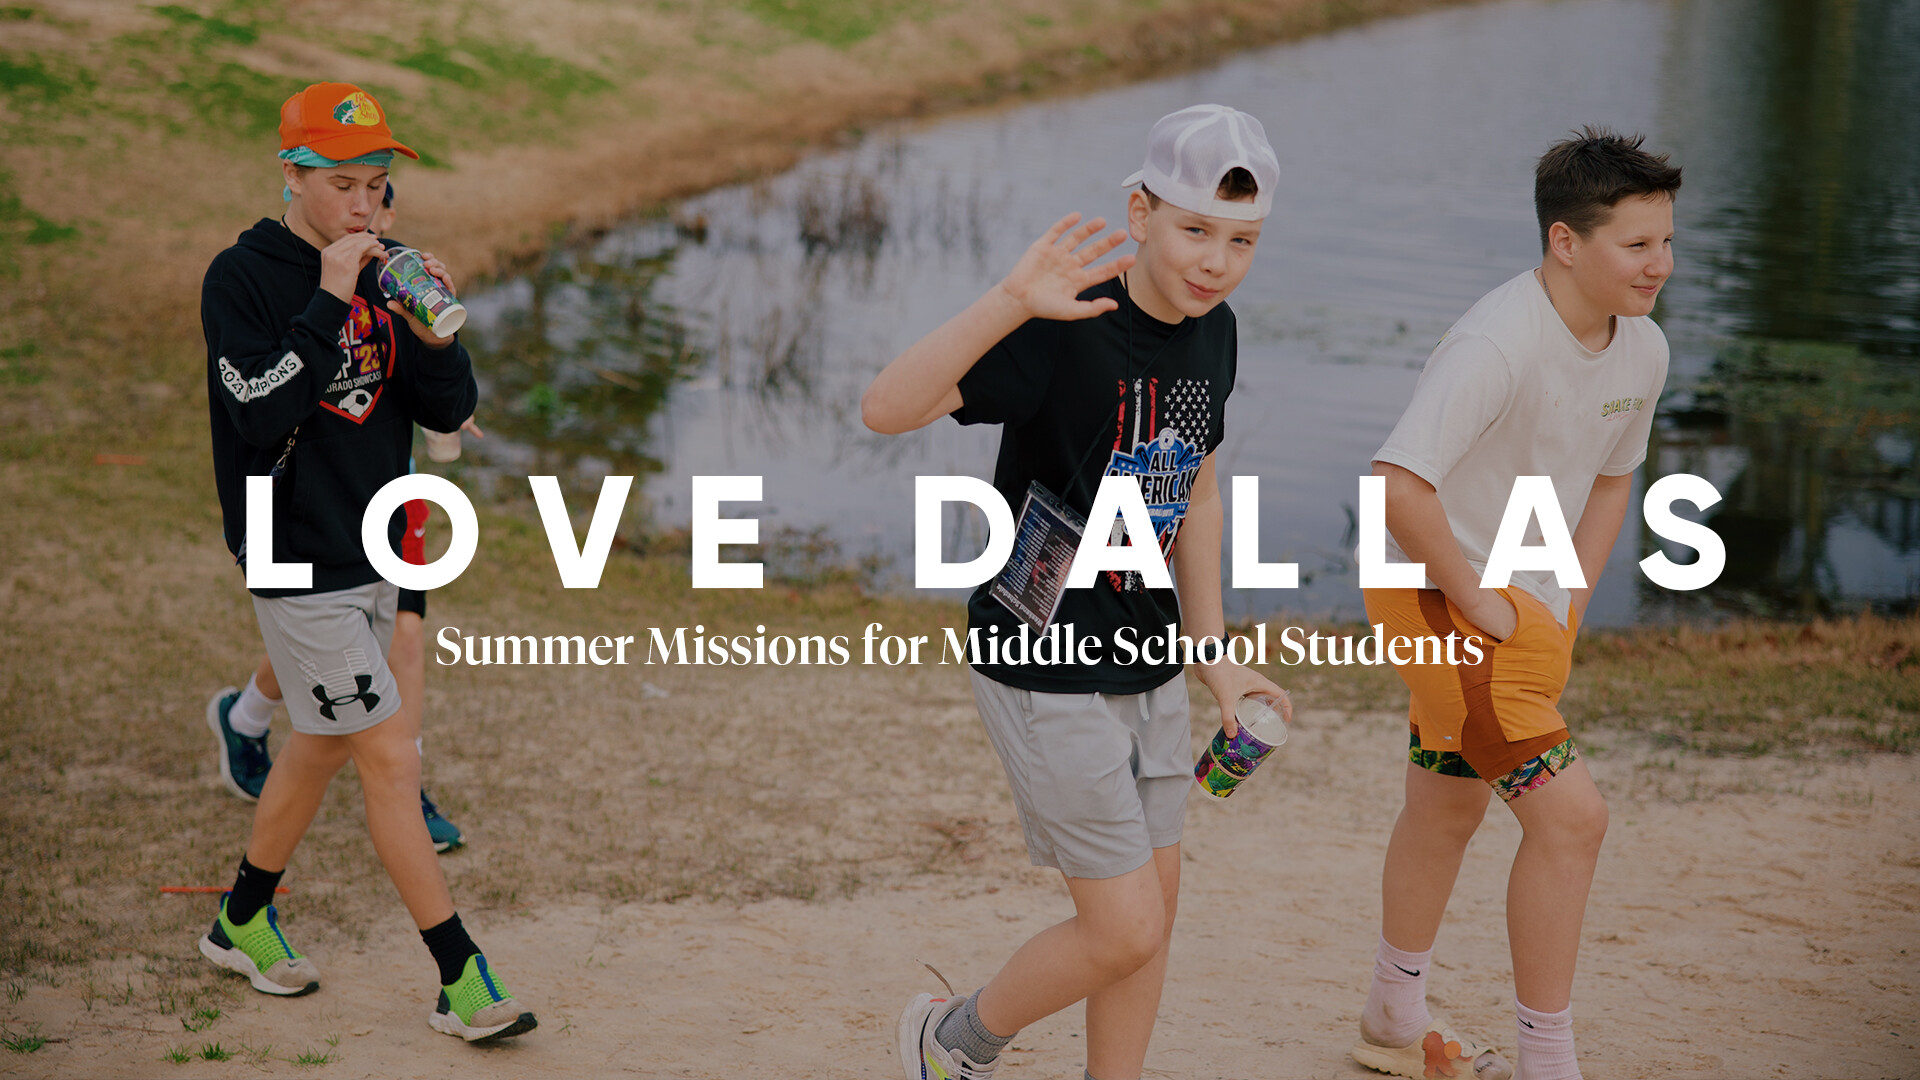 LOVE DALLAS: Summer Missions for Middle School Students